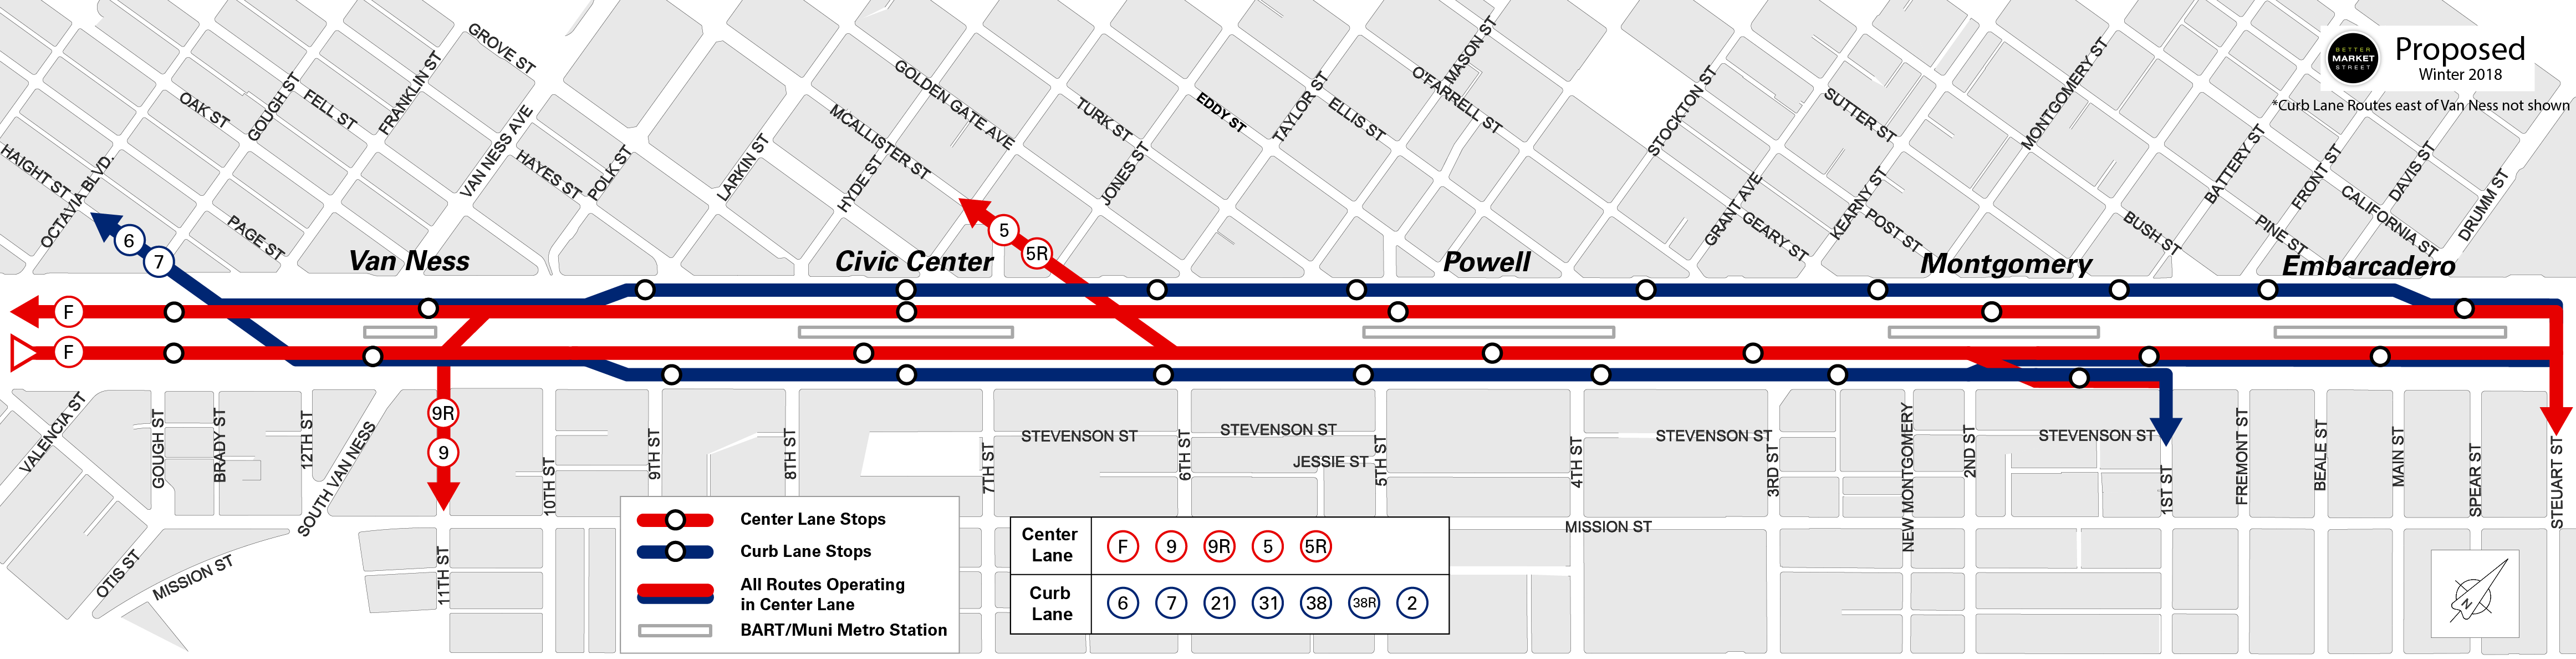 How Muni will run Market Street services in the future. Images: SFMTA